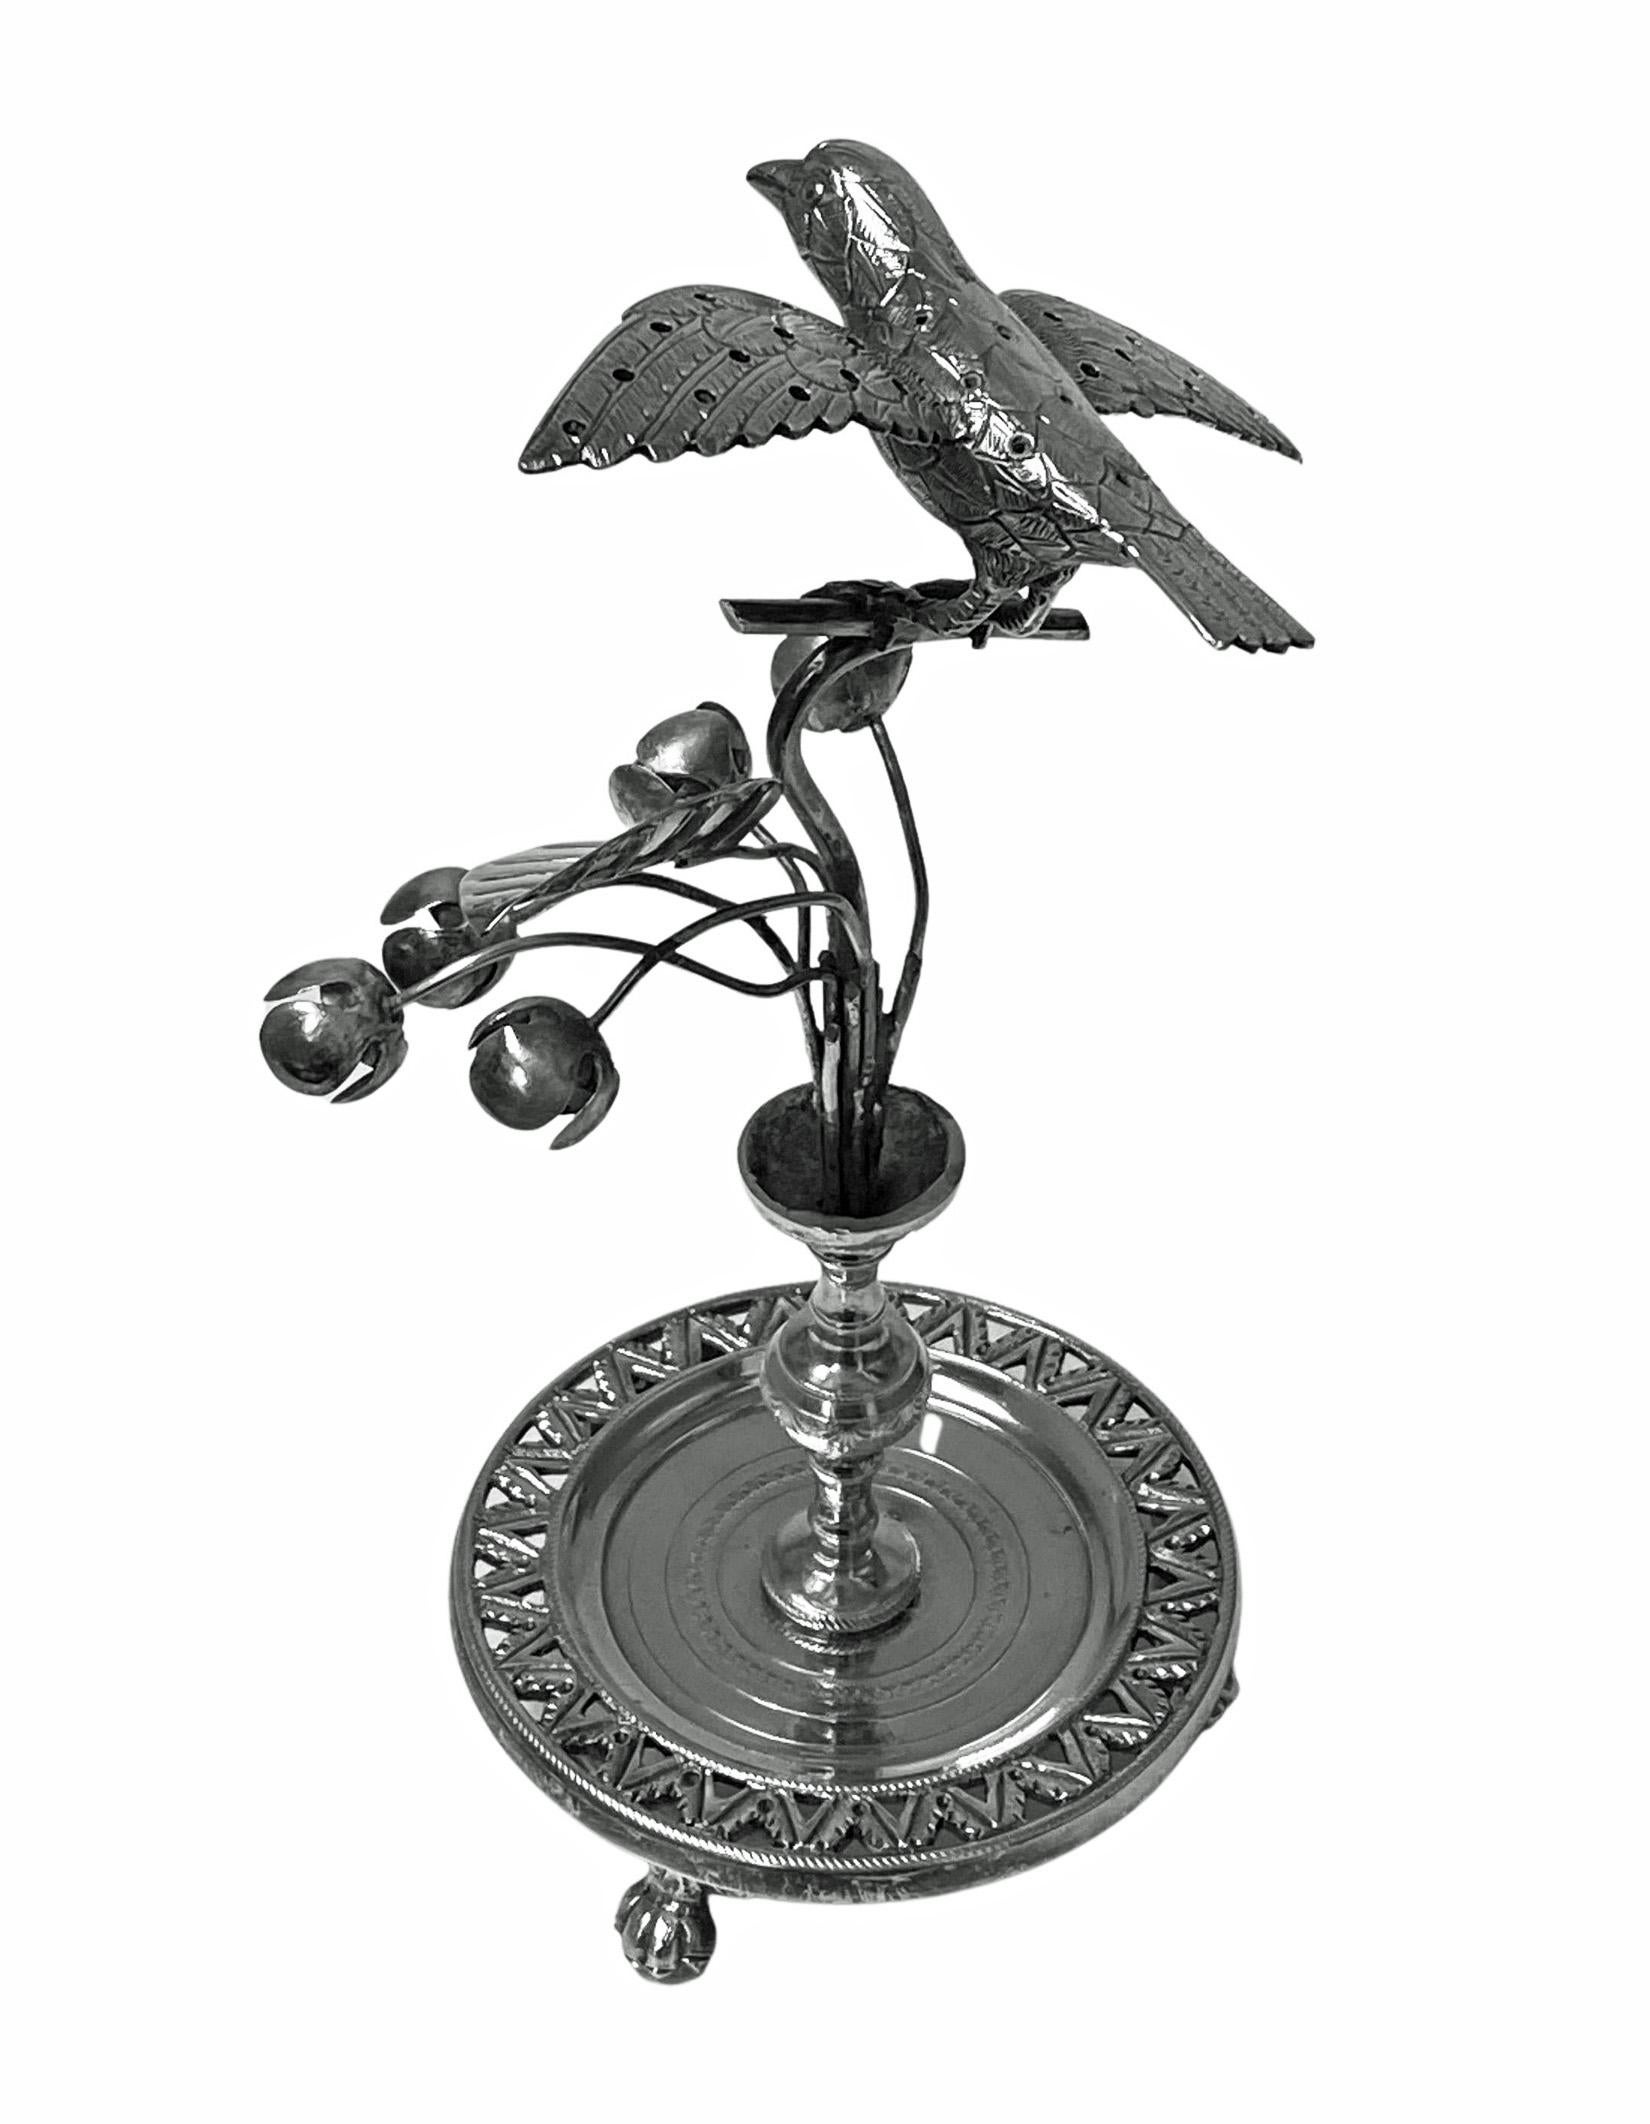 Antique silver toothpick or cocktail stick holder, Rio de Janeiro, Brazil, circa 1850. The holder in the form of an exotic bird surmounted on bud flower foliage branches on knopped stem in turn on circular pierced foliage and wriggle work base on